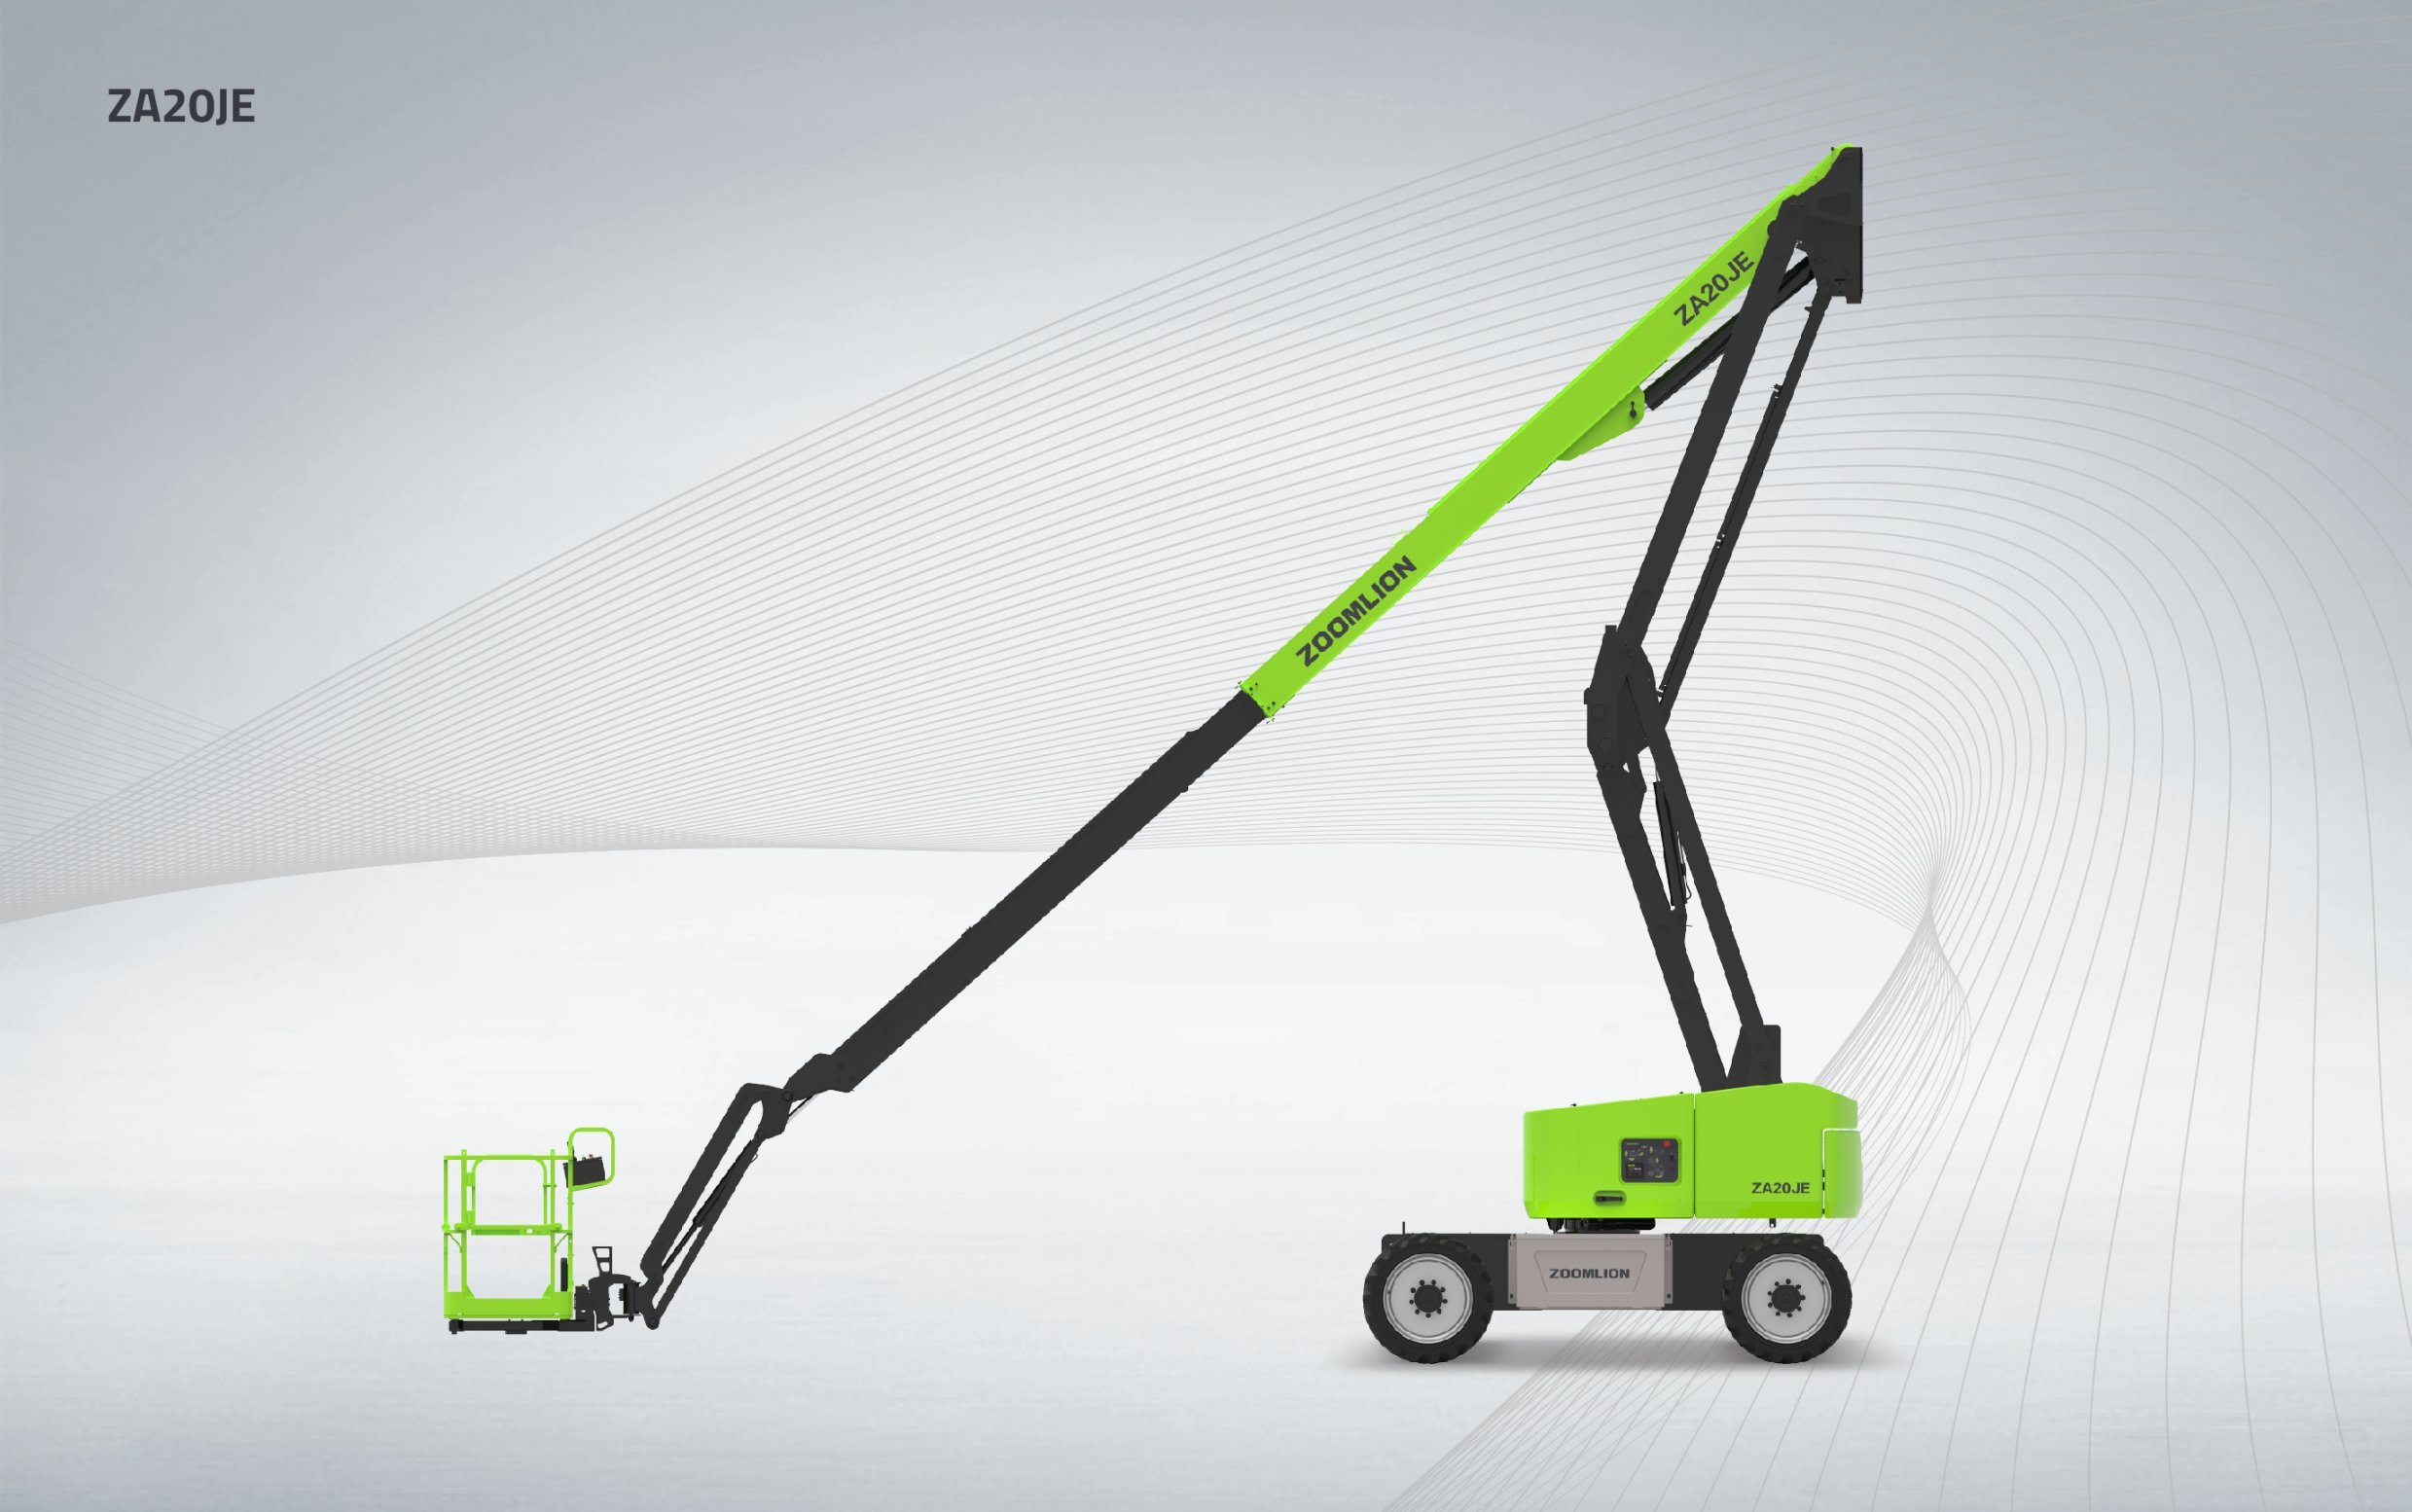 Awp Official Hot-Selling Za20je 20m Electric Lift Equip Articulated Boom Lift